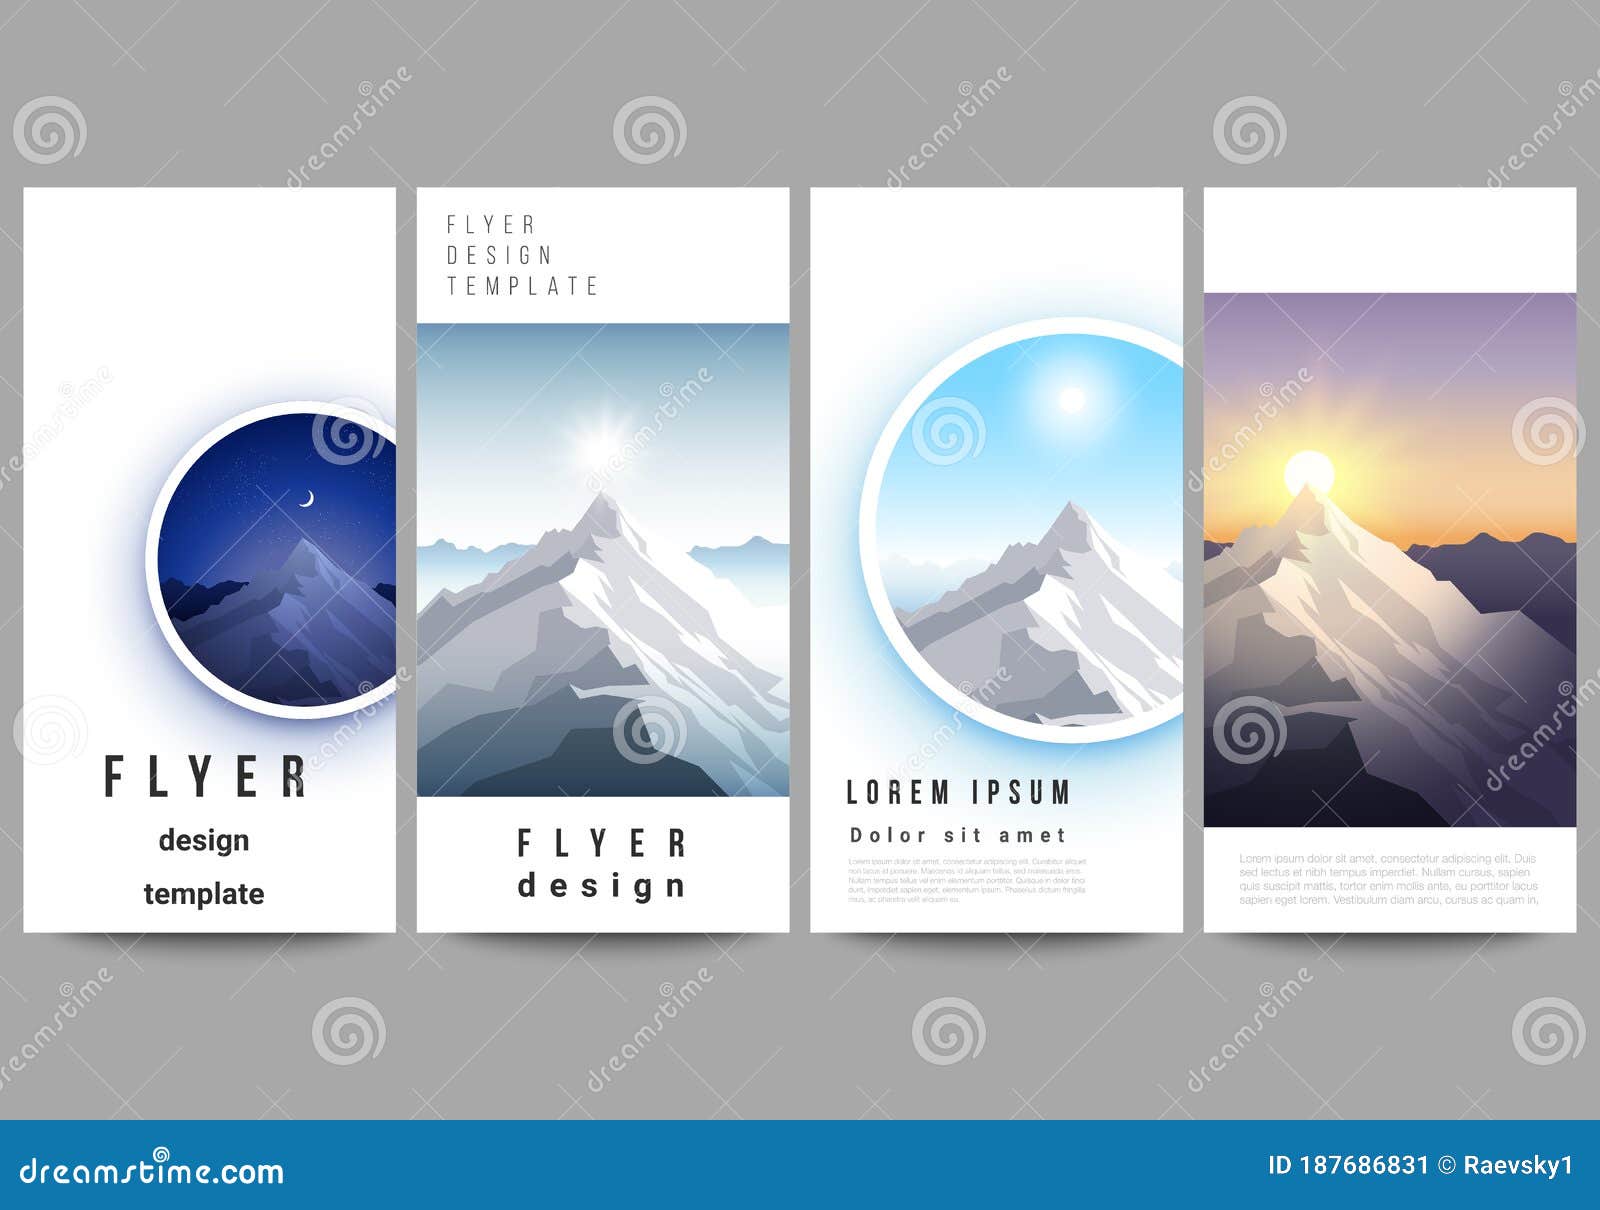 The Minimalistic Vector Illustration of the Editable Layout of Inside Outdoor Banner Design Templates